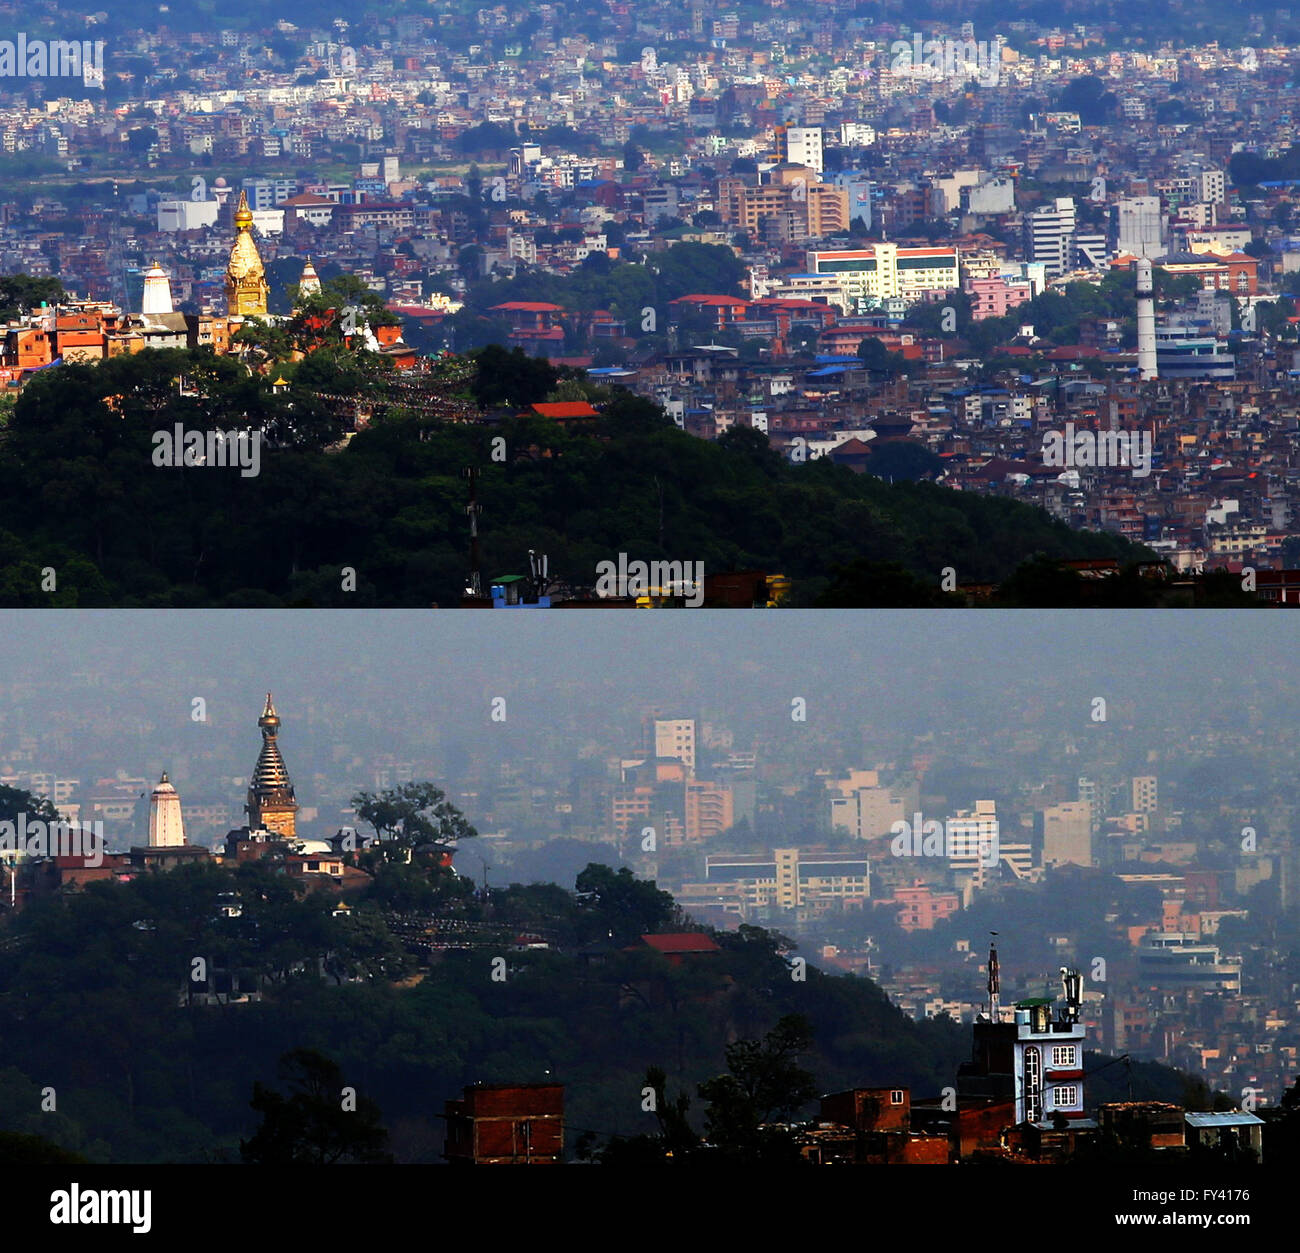 Kathmandu, Nepal. 20th Apr, 2016. Combined photo taken on July 19, 2014 (top) shows the view of Kathmandu valley with Swayambhunath Stupa (L), or monkey temple, and historical Bhimsen tower (R), Dharahara, from a hill in Kathmandu and the valley view (bottom) with Swayambhunath stupa which was badly damaged by the earthquake last year from a hill in Kathmandu, Nepal, April 20, 2016. Reconstruction process is undergoing in Swayambhunath stupa as it was badly damaged in the earthquake last year. © Sunil Sharma/Xinhua/Alamy Live News Stock Photo